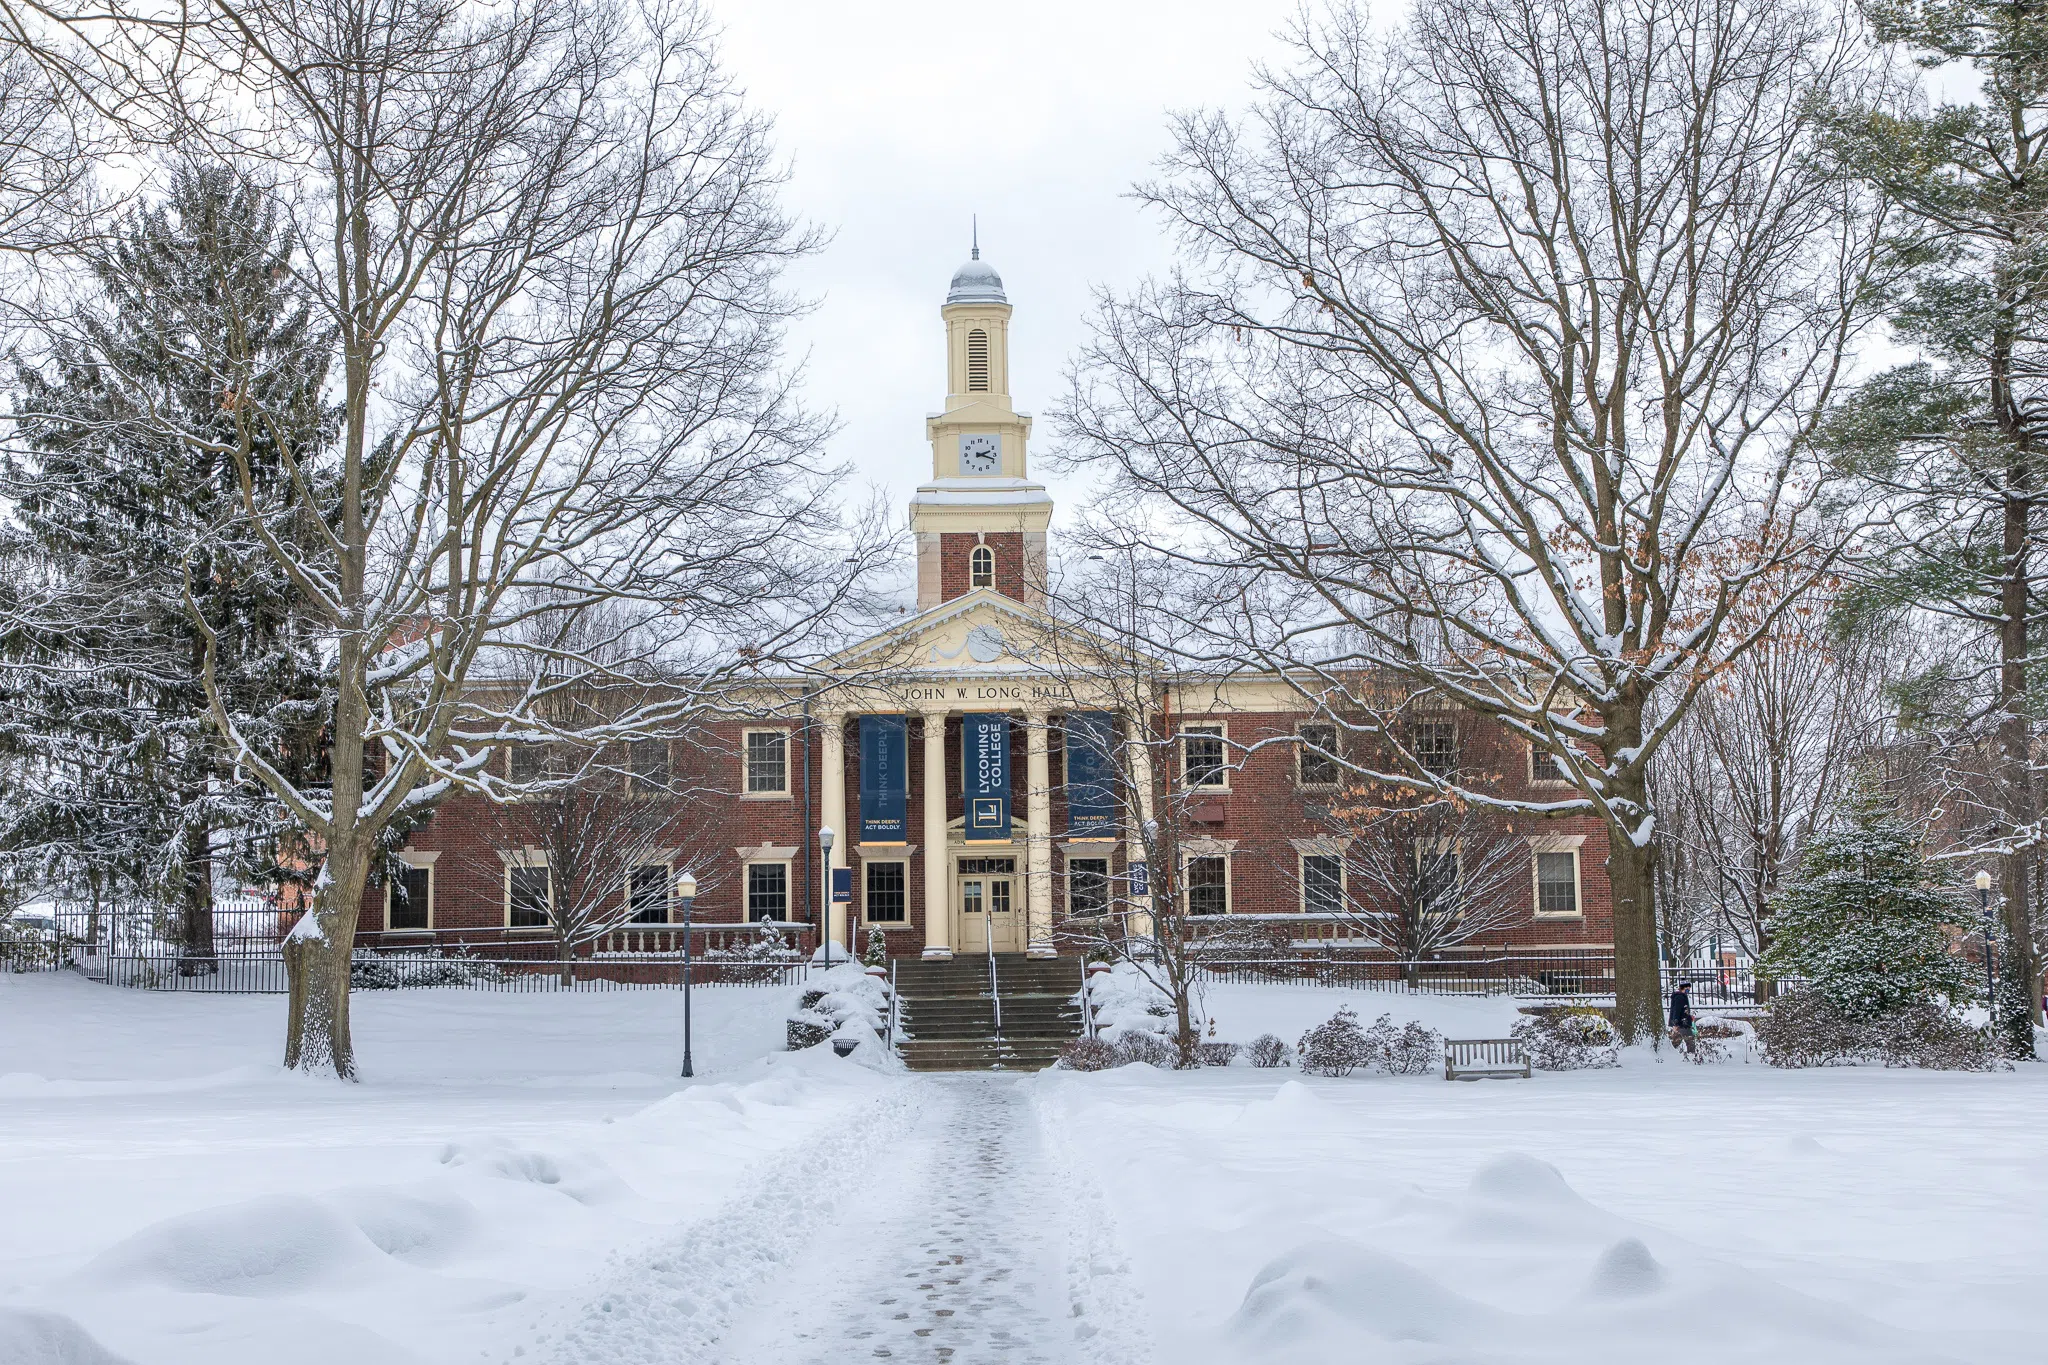 John W. Long Hall on a snowy day in February.